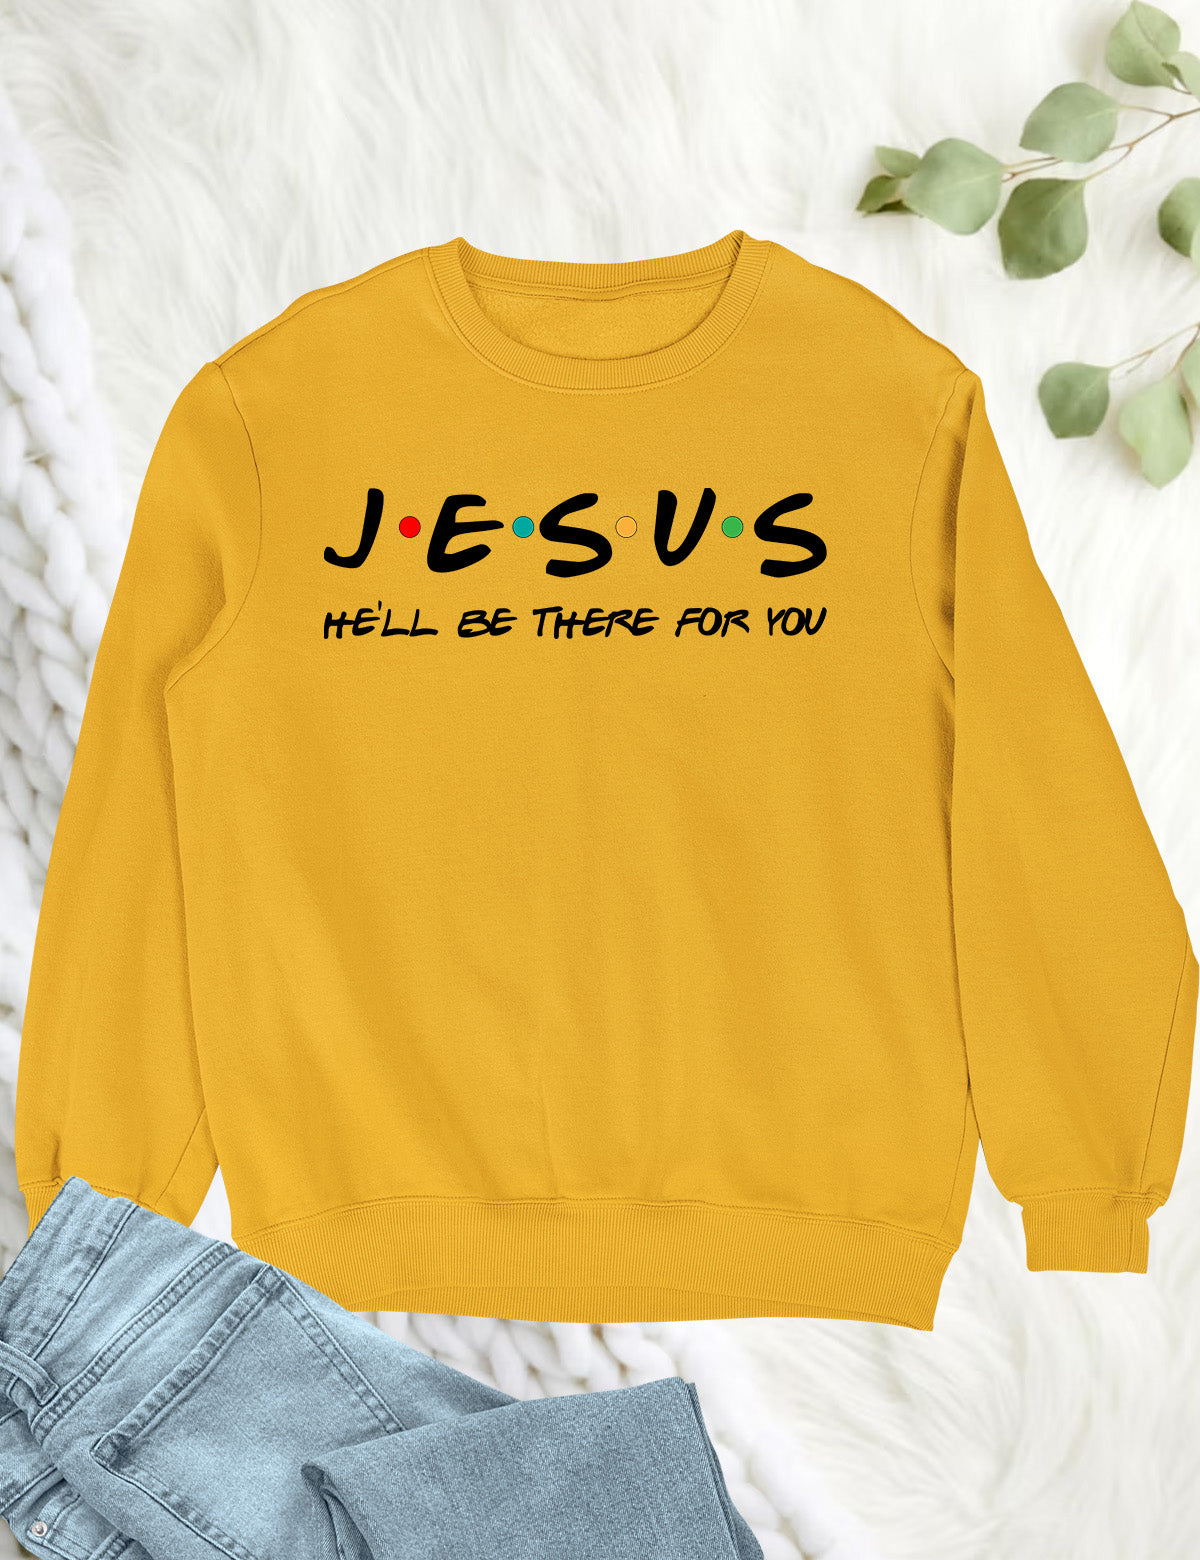 Jesus He'll Be There For You Sweatshirt